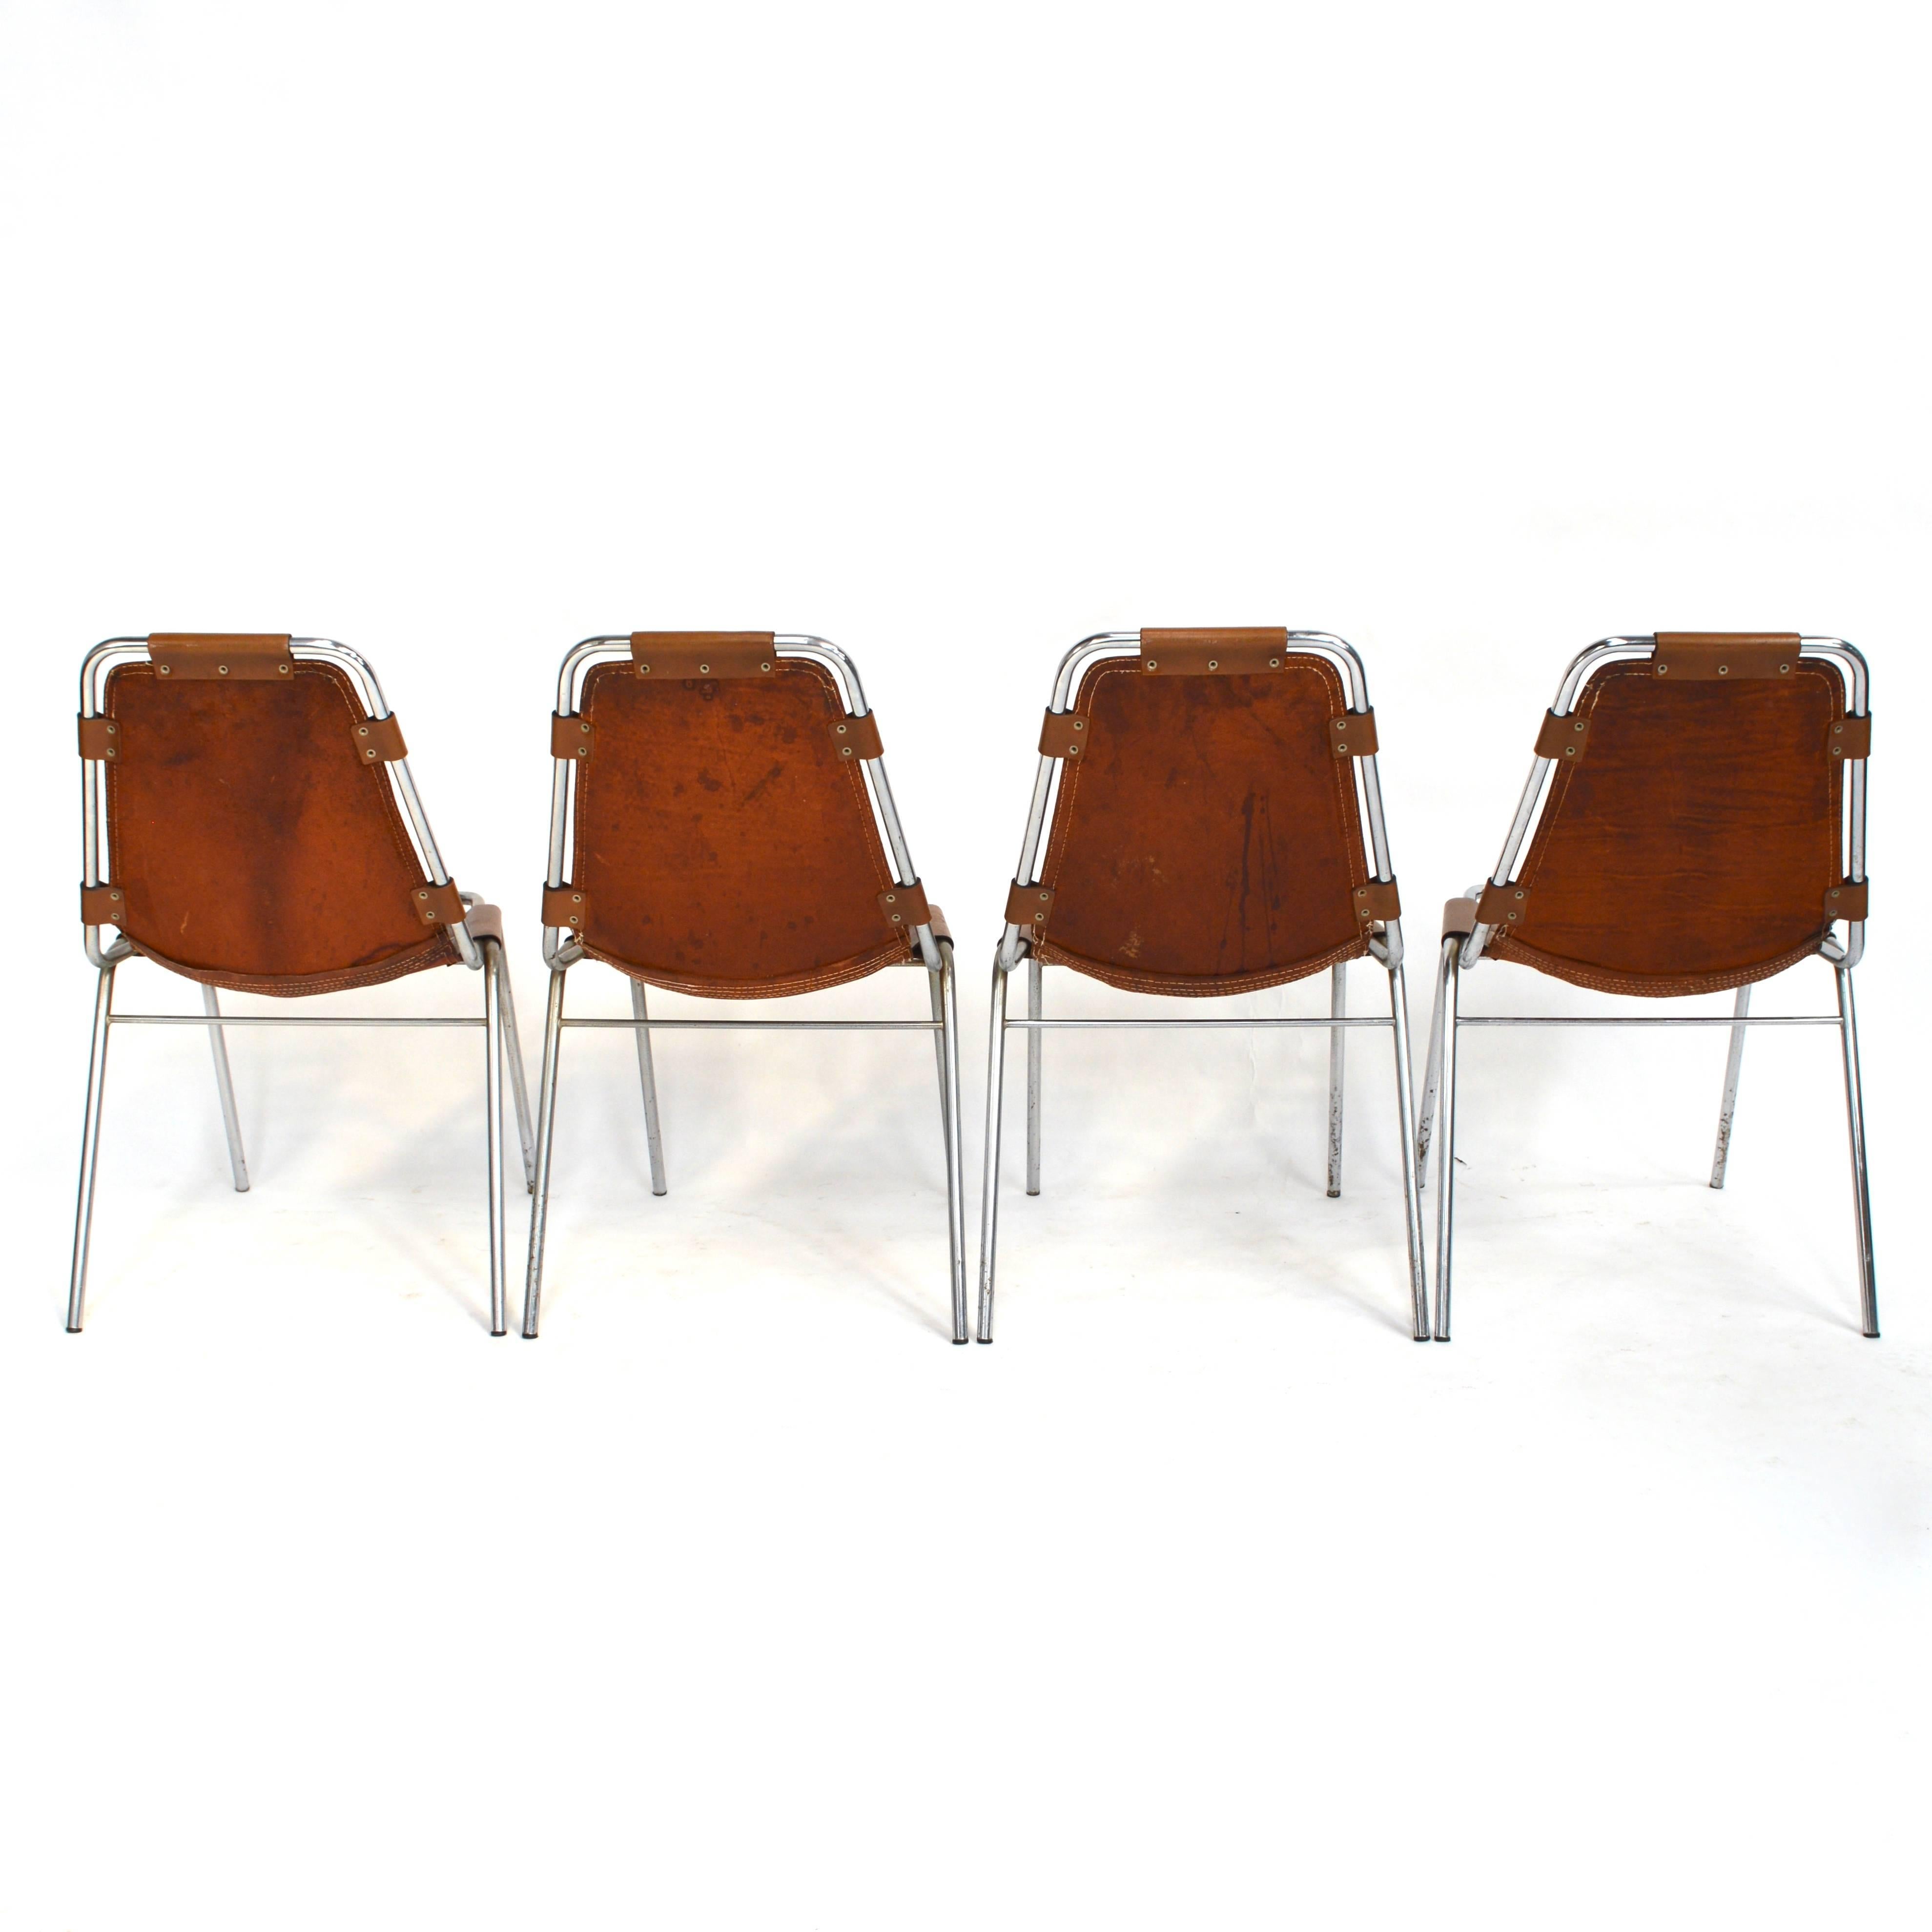 Mid-Century Modern Set of Four Original Charlotte Perriand Les Arcs Chairs